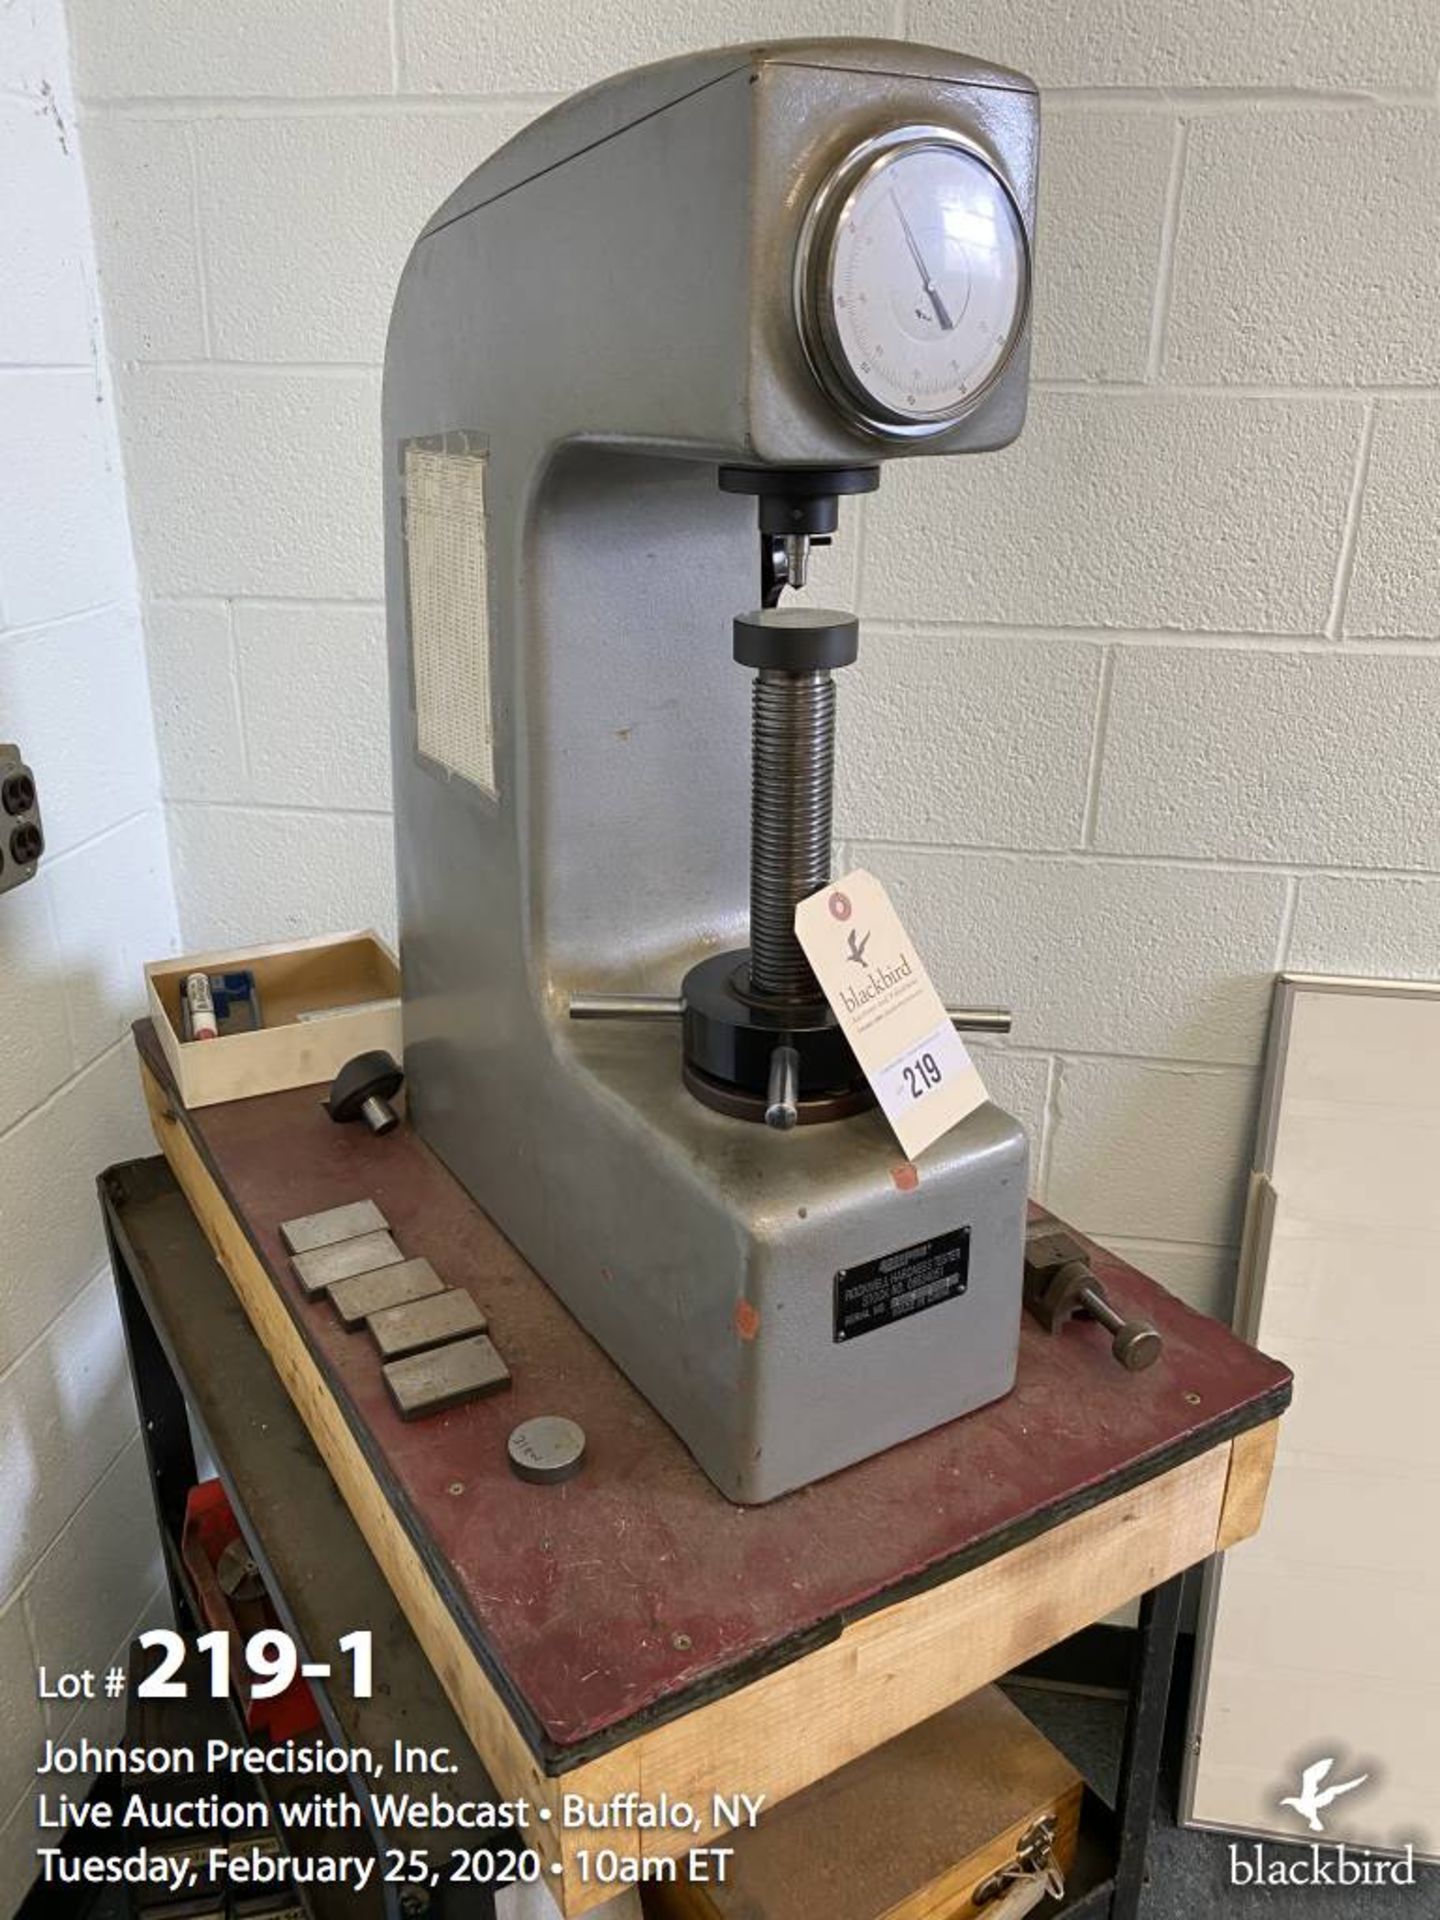 Accupro Rockwell hardness tester